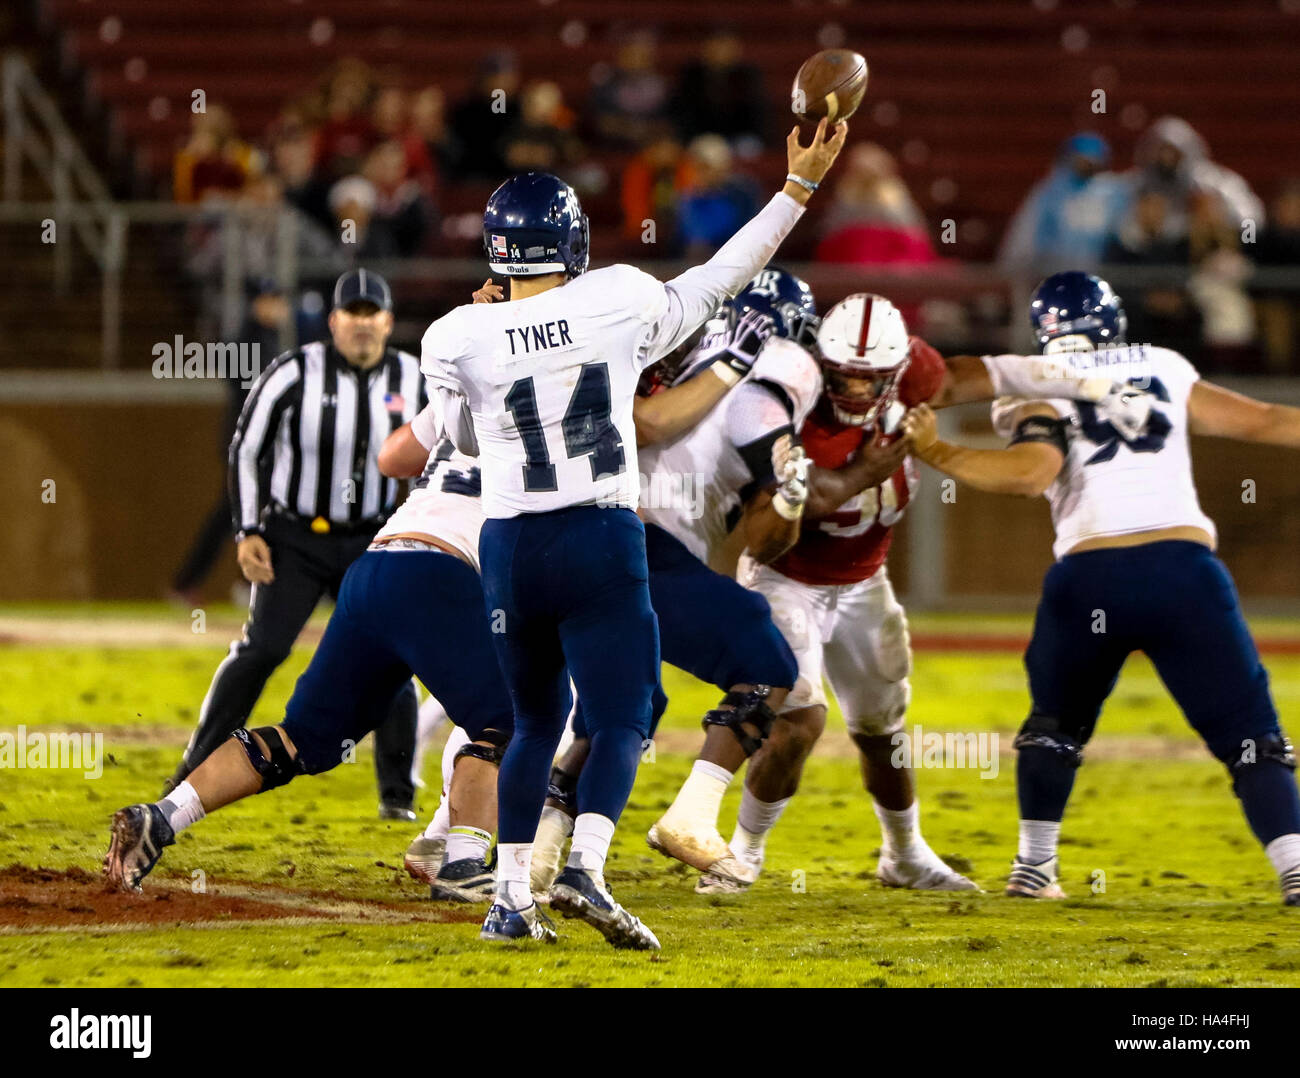 Palo Alto, California, USA. 26th Nov, 2016. Rice Quarterback Jackson Tyner (14) stands in the pocket in NCAA football action at Stanford University, featuring the Rice Owls visiting the Stanford Cardinal. Stanford won the game 41-17. © Seth Riskin/ZUMA Wire/Alamy Live News Stock Photo